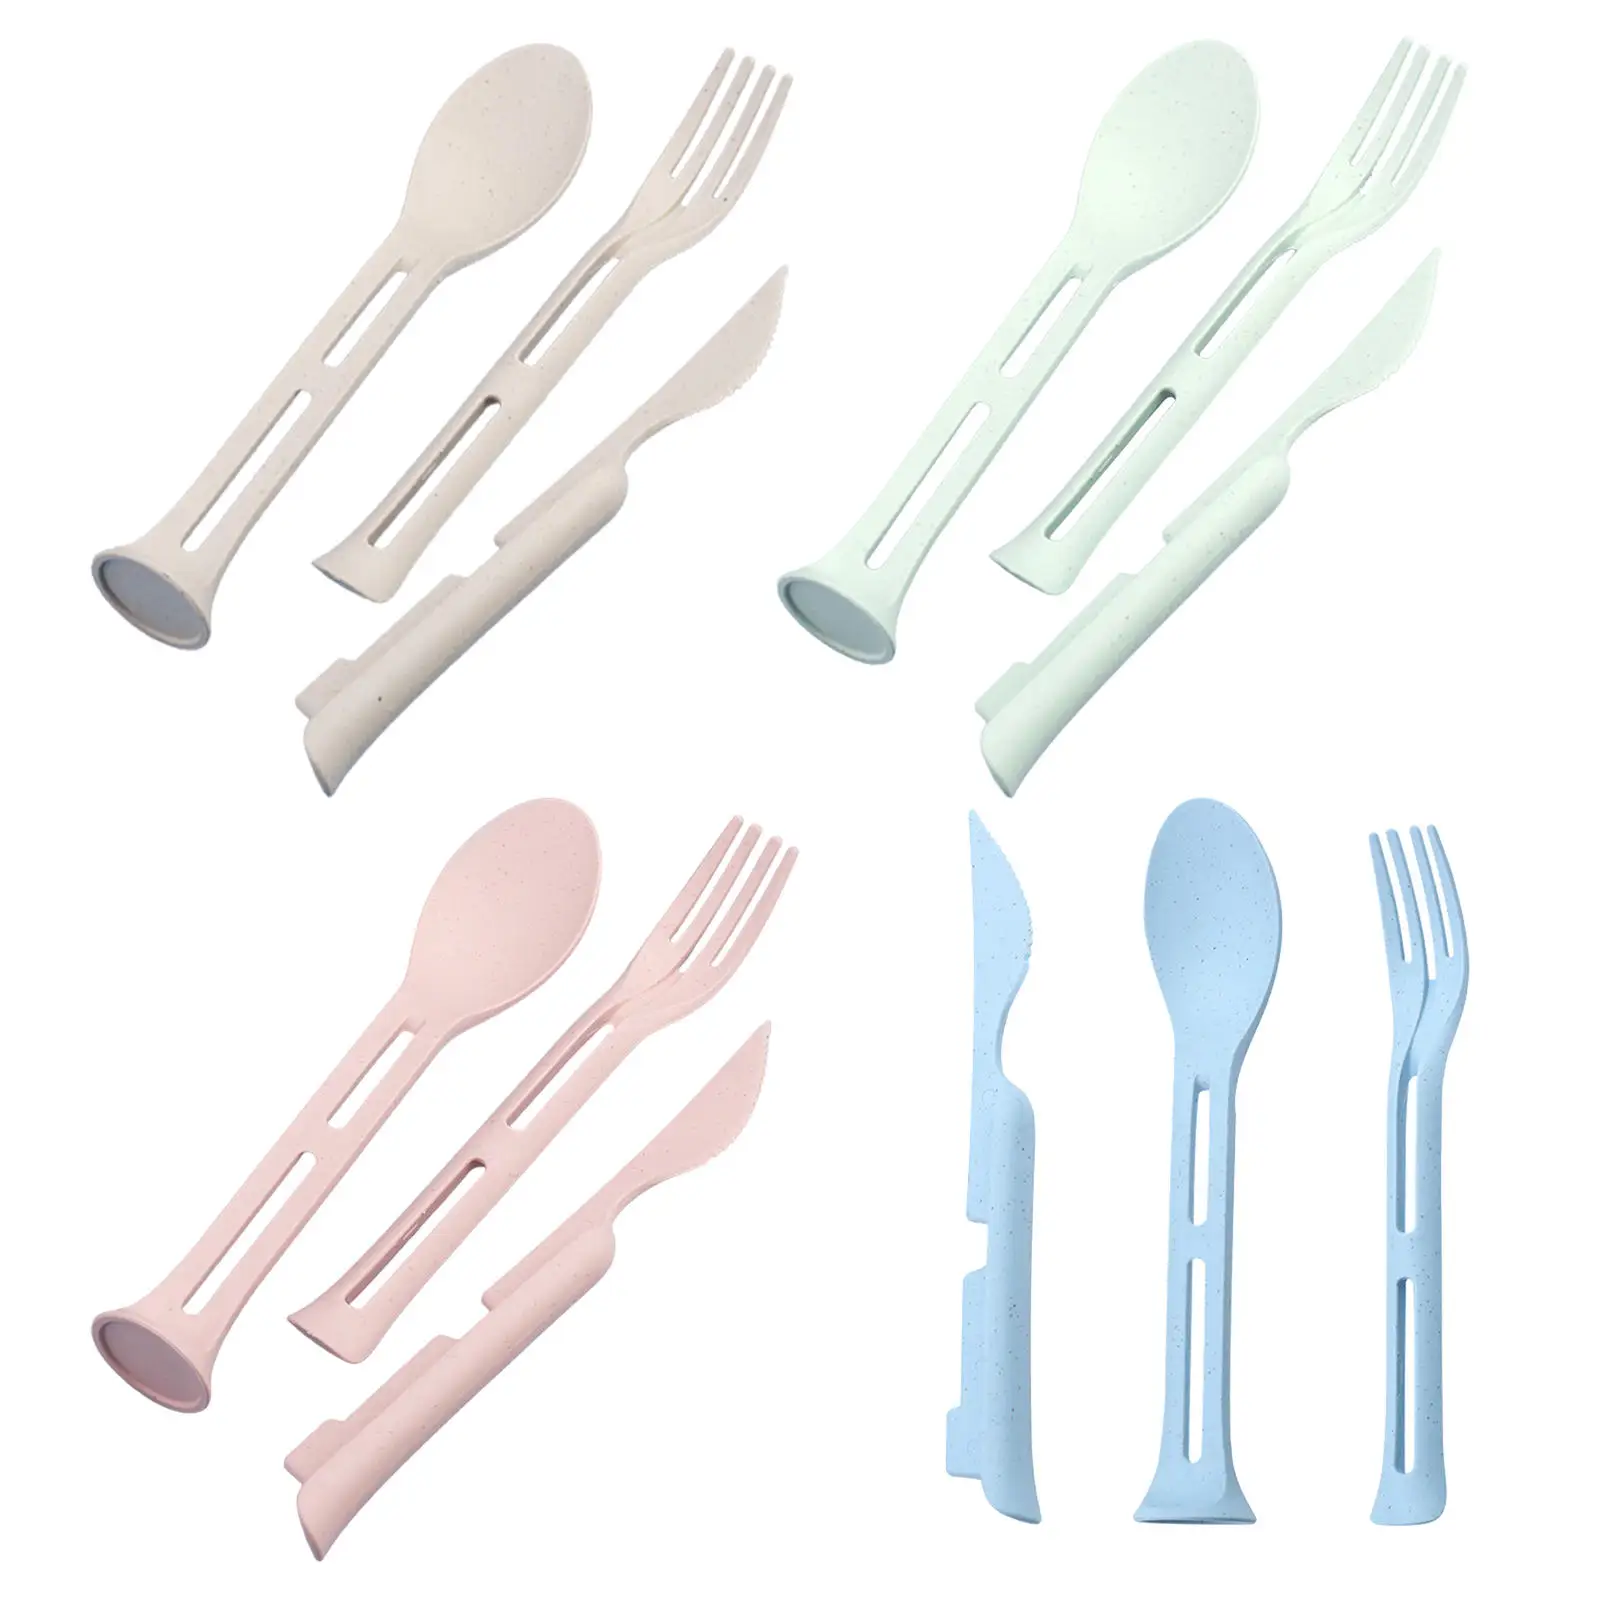 3 Pieces 3 in 1 Knife Spoon Fork Set, Gadgets Portable Dinnerware Tableware Flatware for Training Travel Kids 2 Year Old Toddler